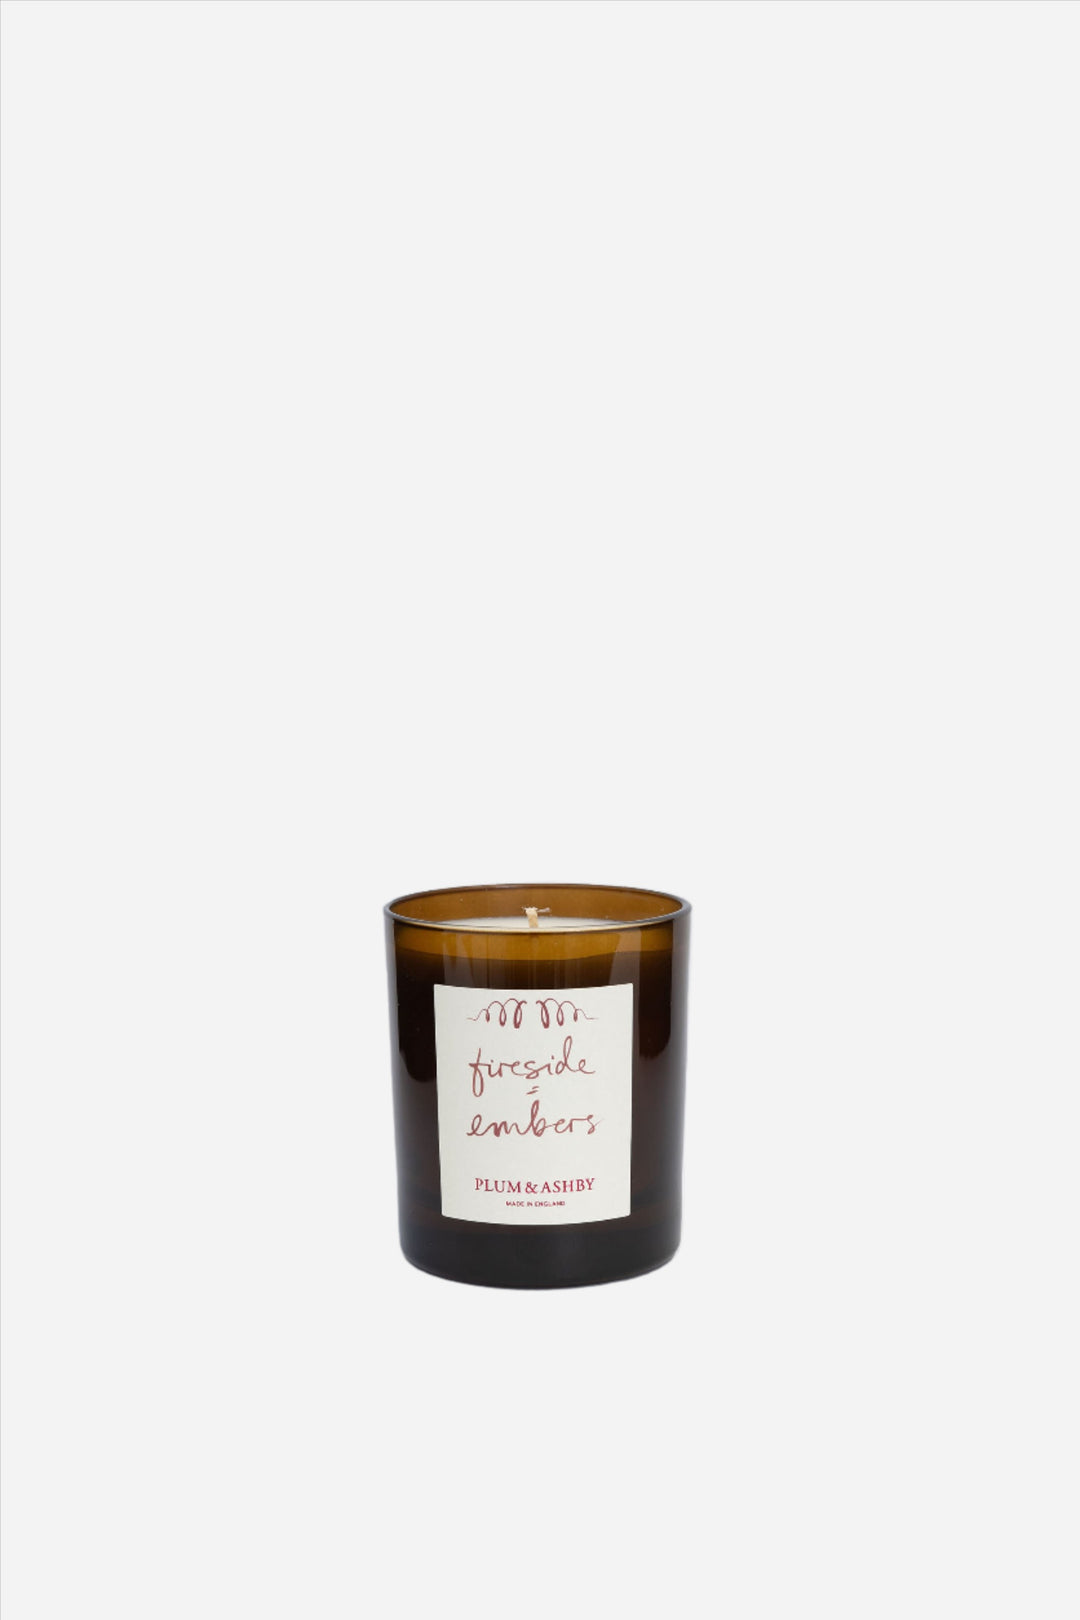 Plum and Ashby Candle / Fireside Embers